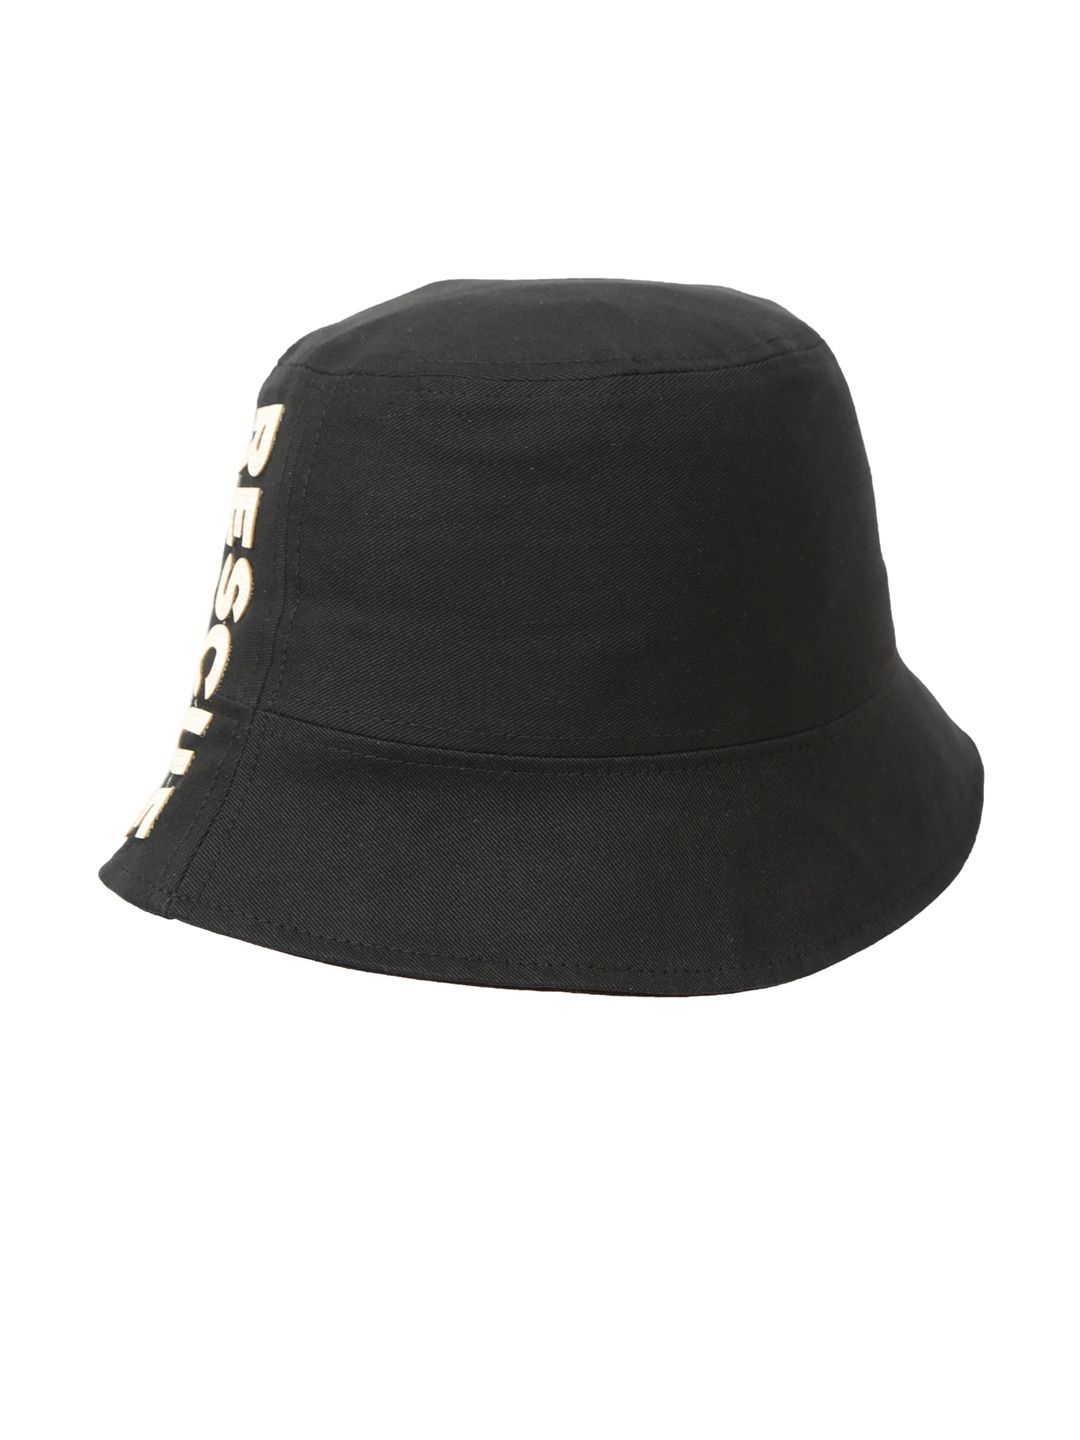 FabSeasons Black & White Printed Pure Cotton Bucket Hat Price in India